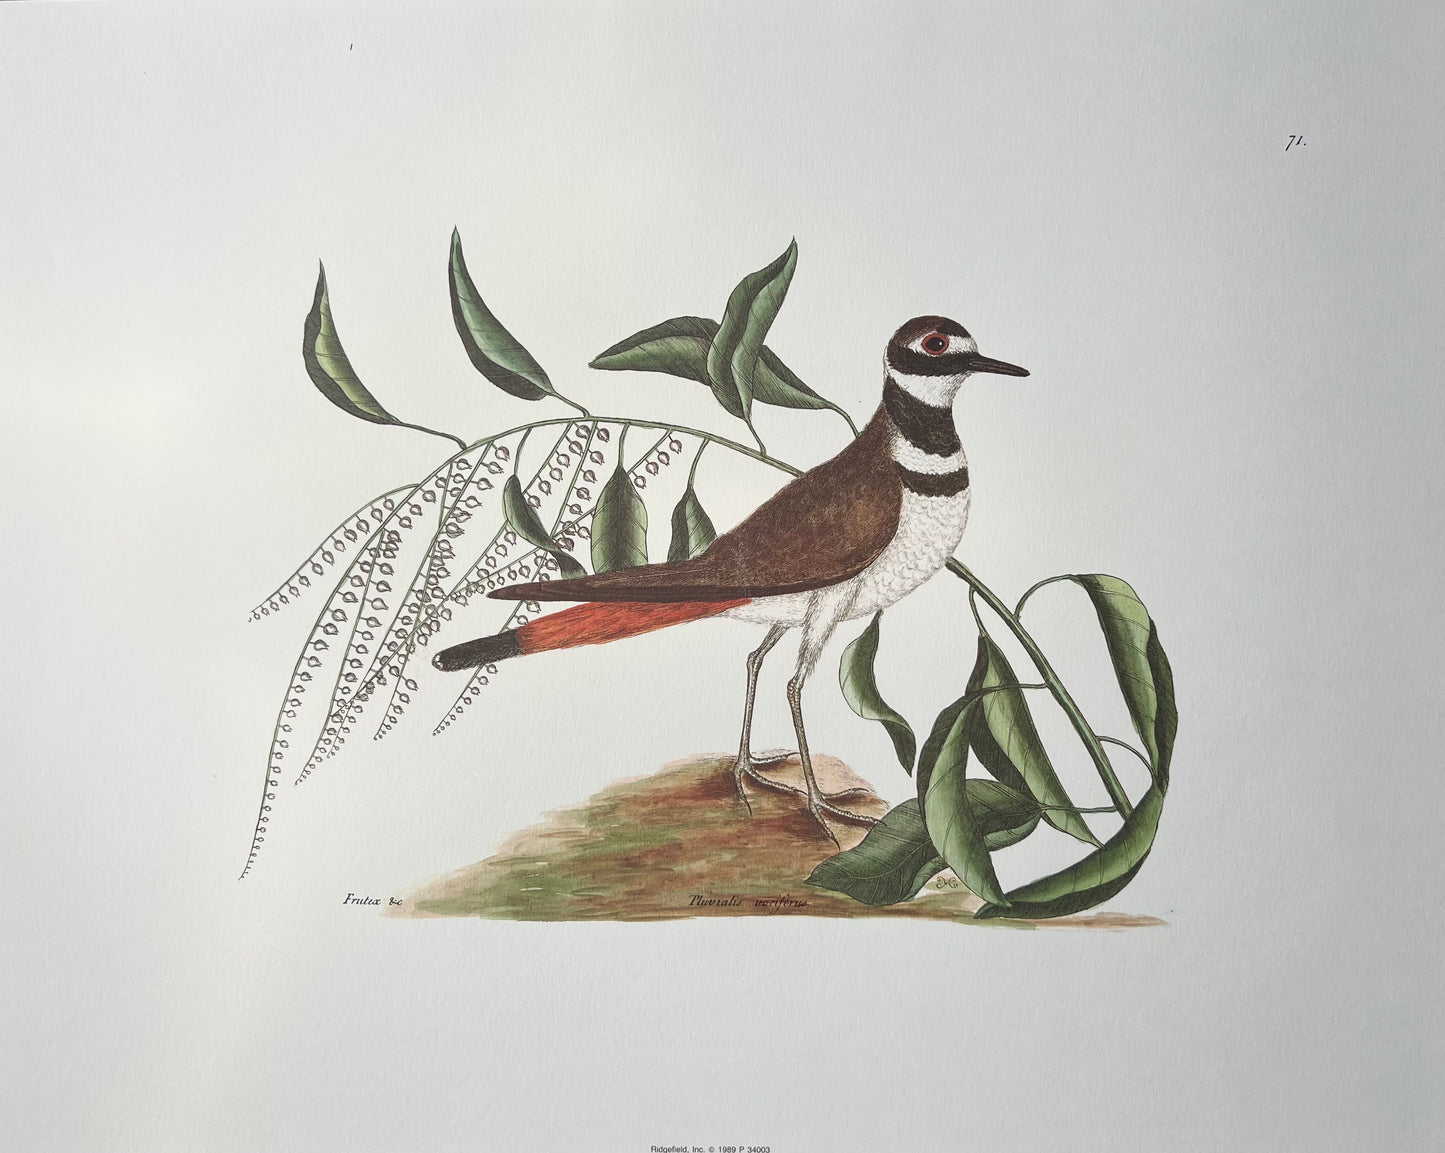 "Chattering Plover" 1989 print after Mark Catesby